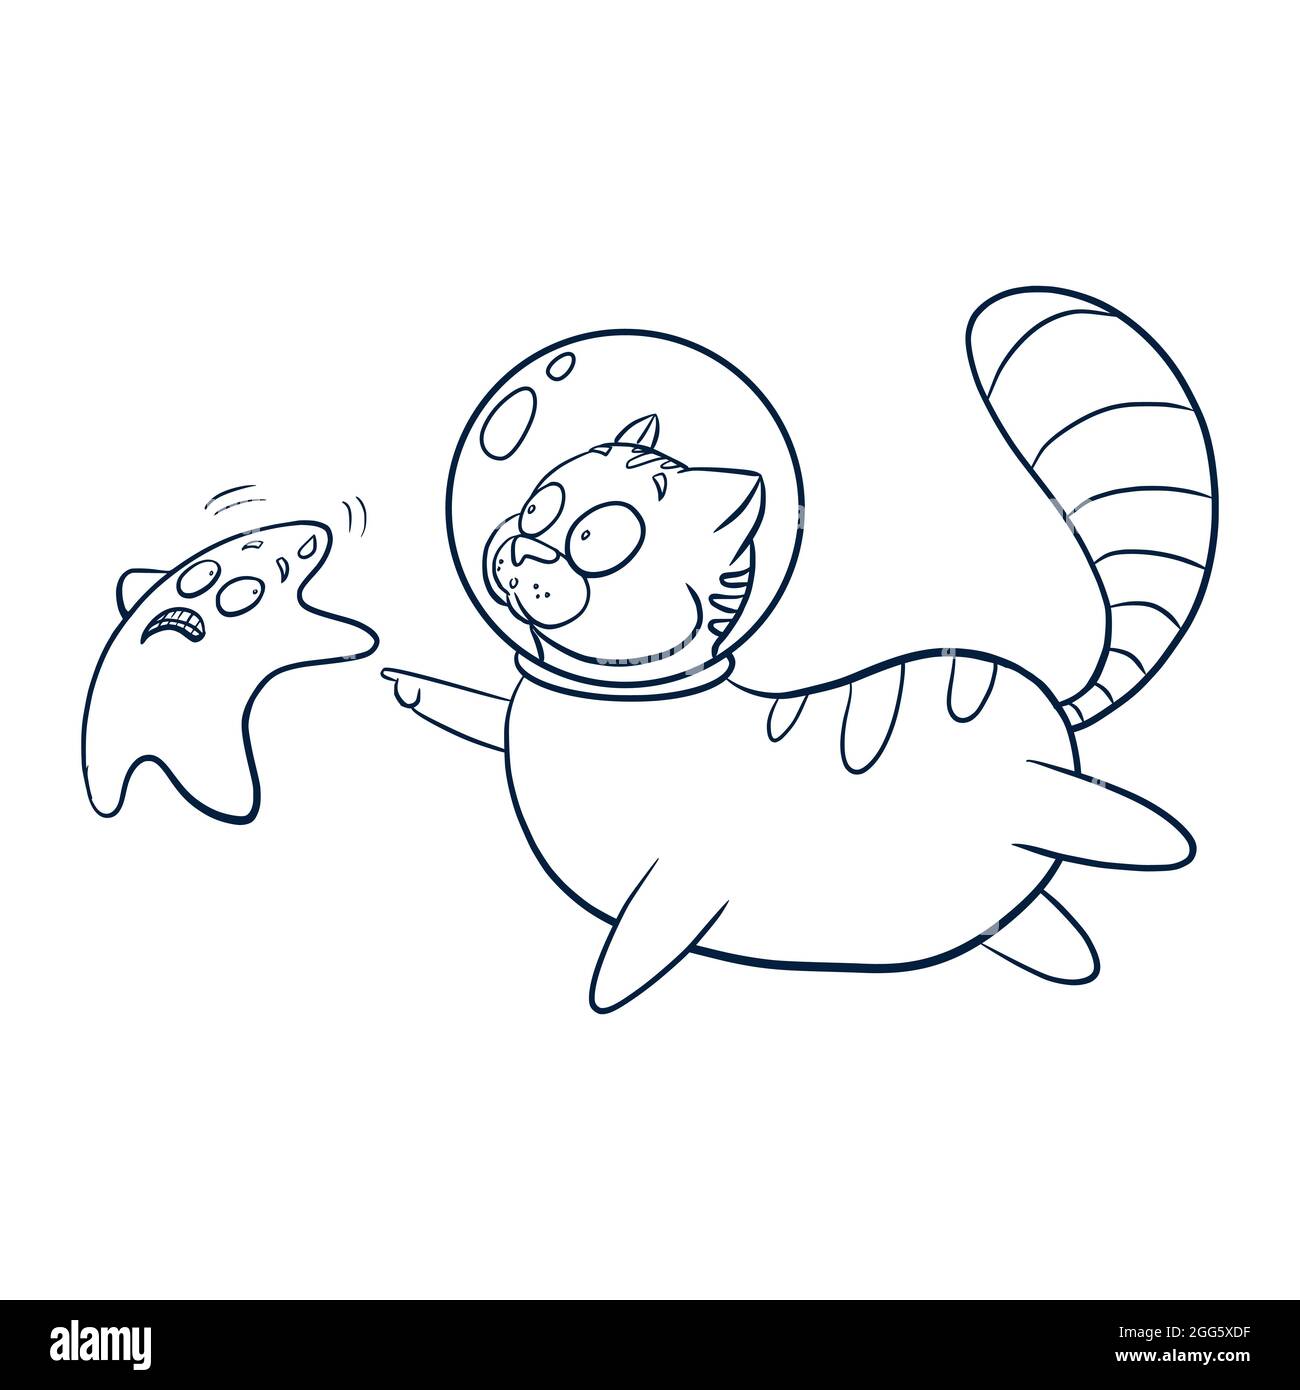 Cat Cosmonaut and Star Illustration. Line Art animal astronaut touching star sketch for logo, coloring book and nursery decor, kids graphic tees, prints and stickers Stock Vector